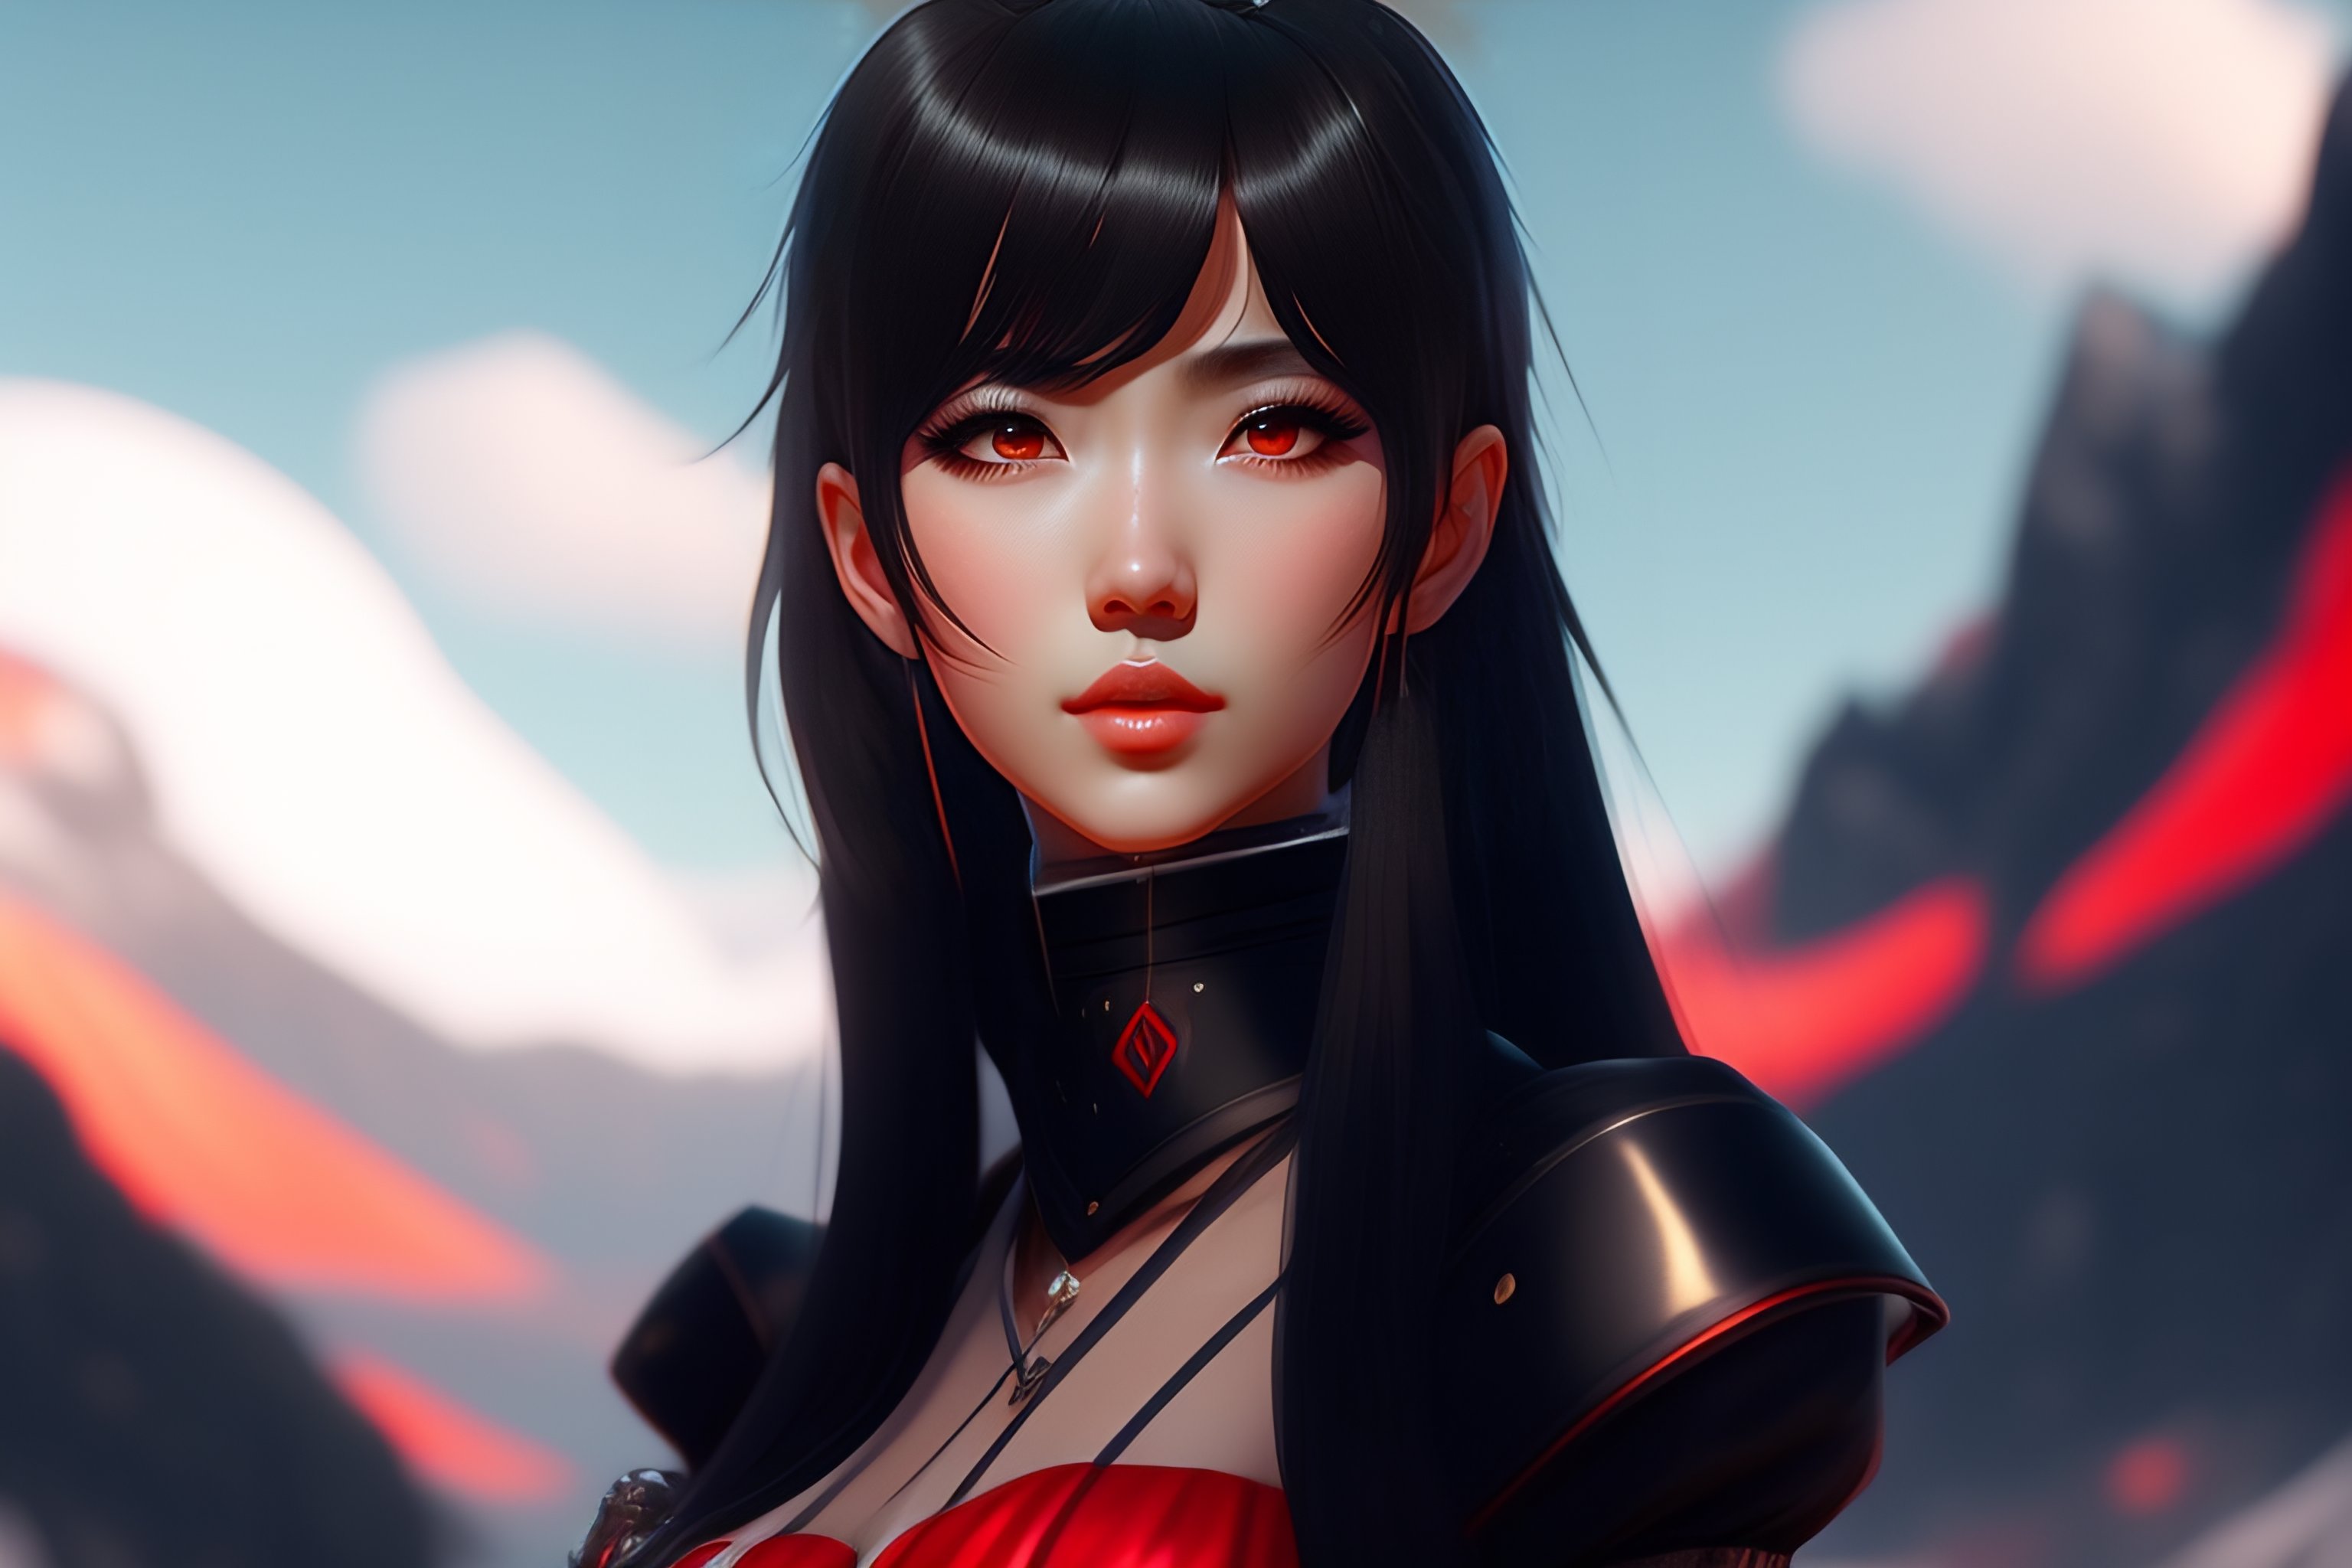 Lexica Cute Anime Girl With Red Eyes Black Hairs Flowing On The Wind Wearing Black Red Outfit 9573